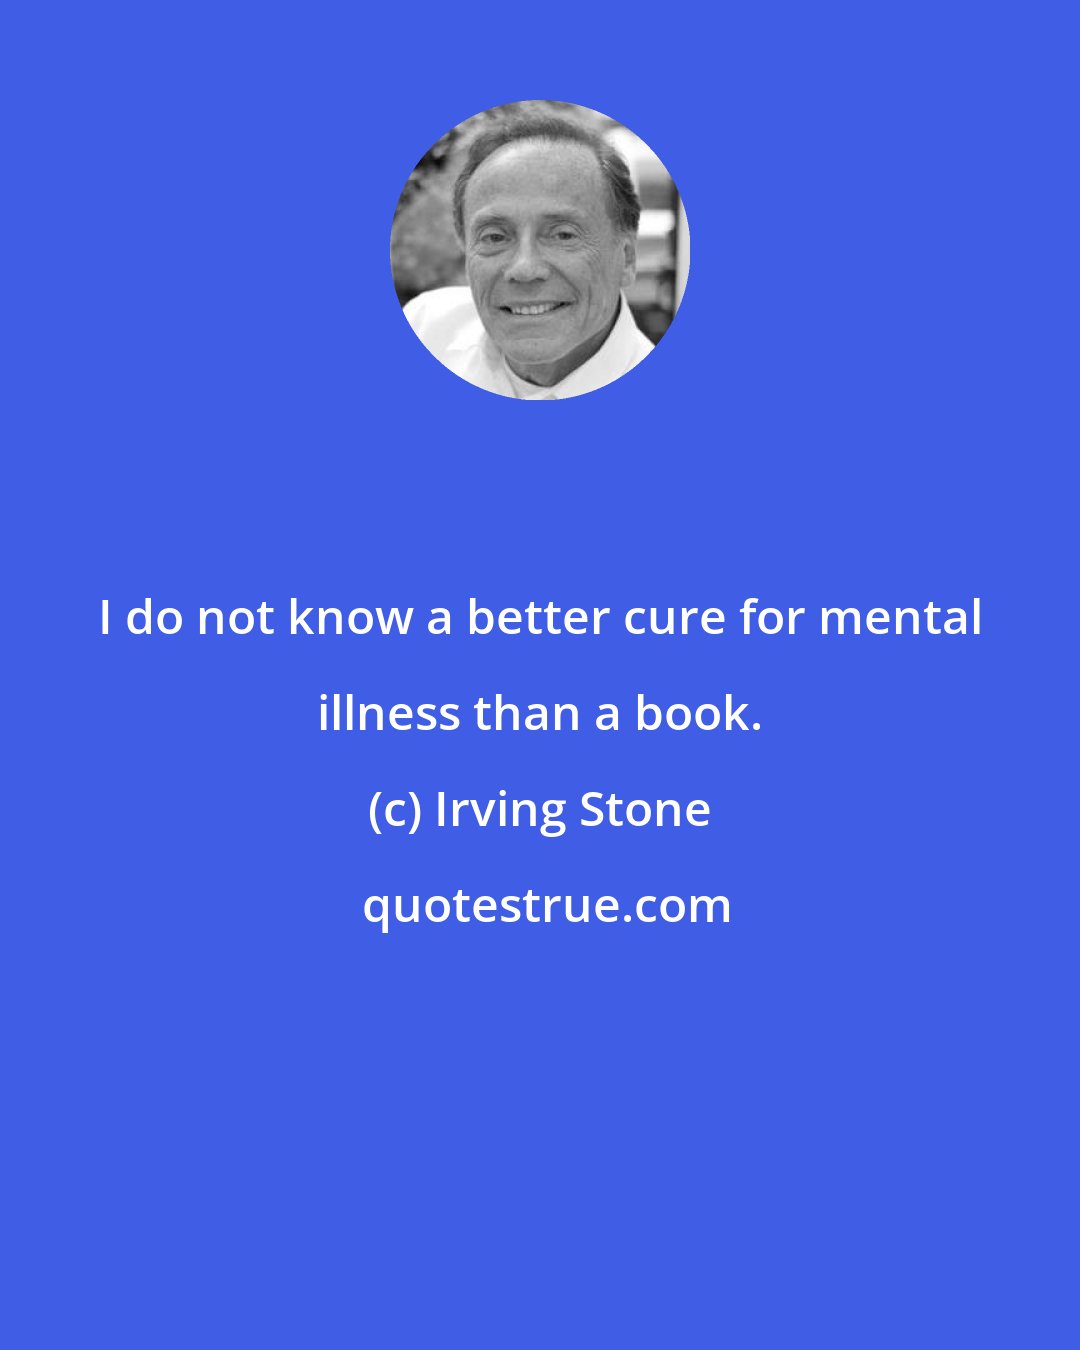 Irving Stone: I do not know a better cure for mental illness than a book.